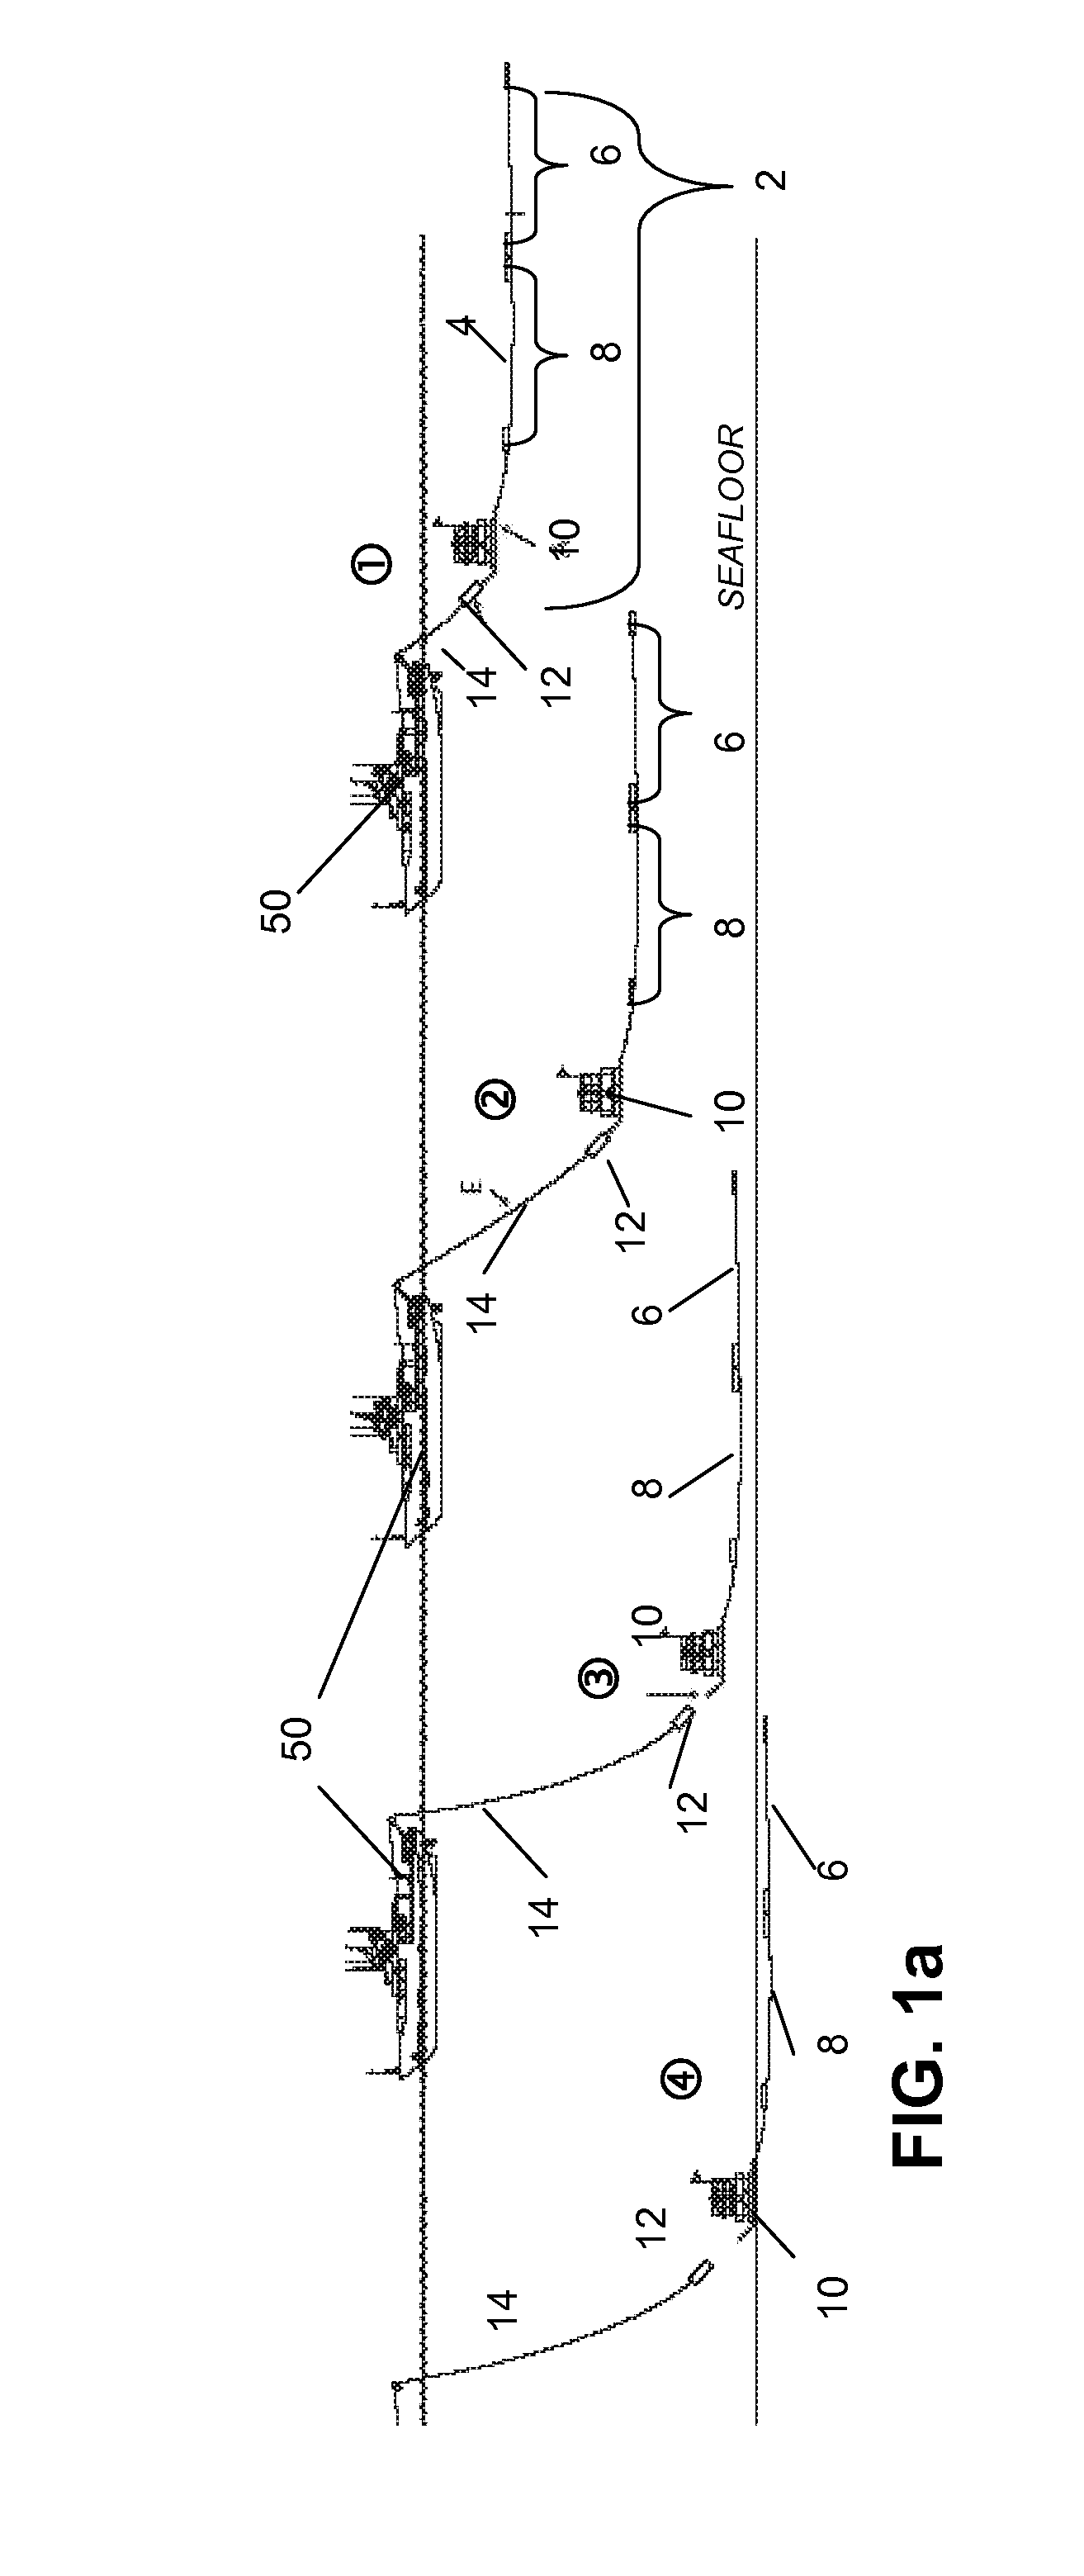 Method and System for Detecting and Mapping Hydrocarbon Reservoirs Using Electromagnetic Fields